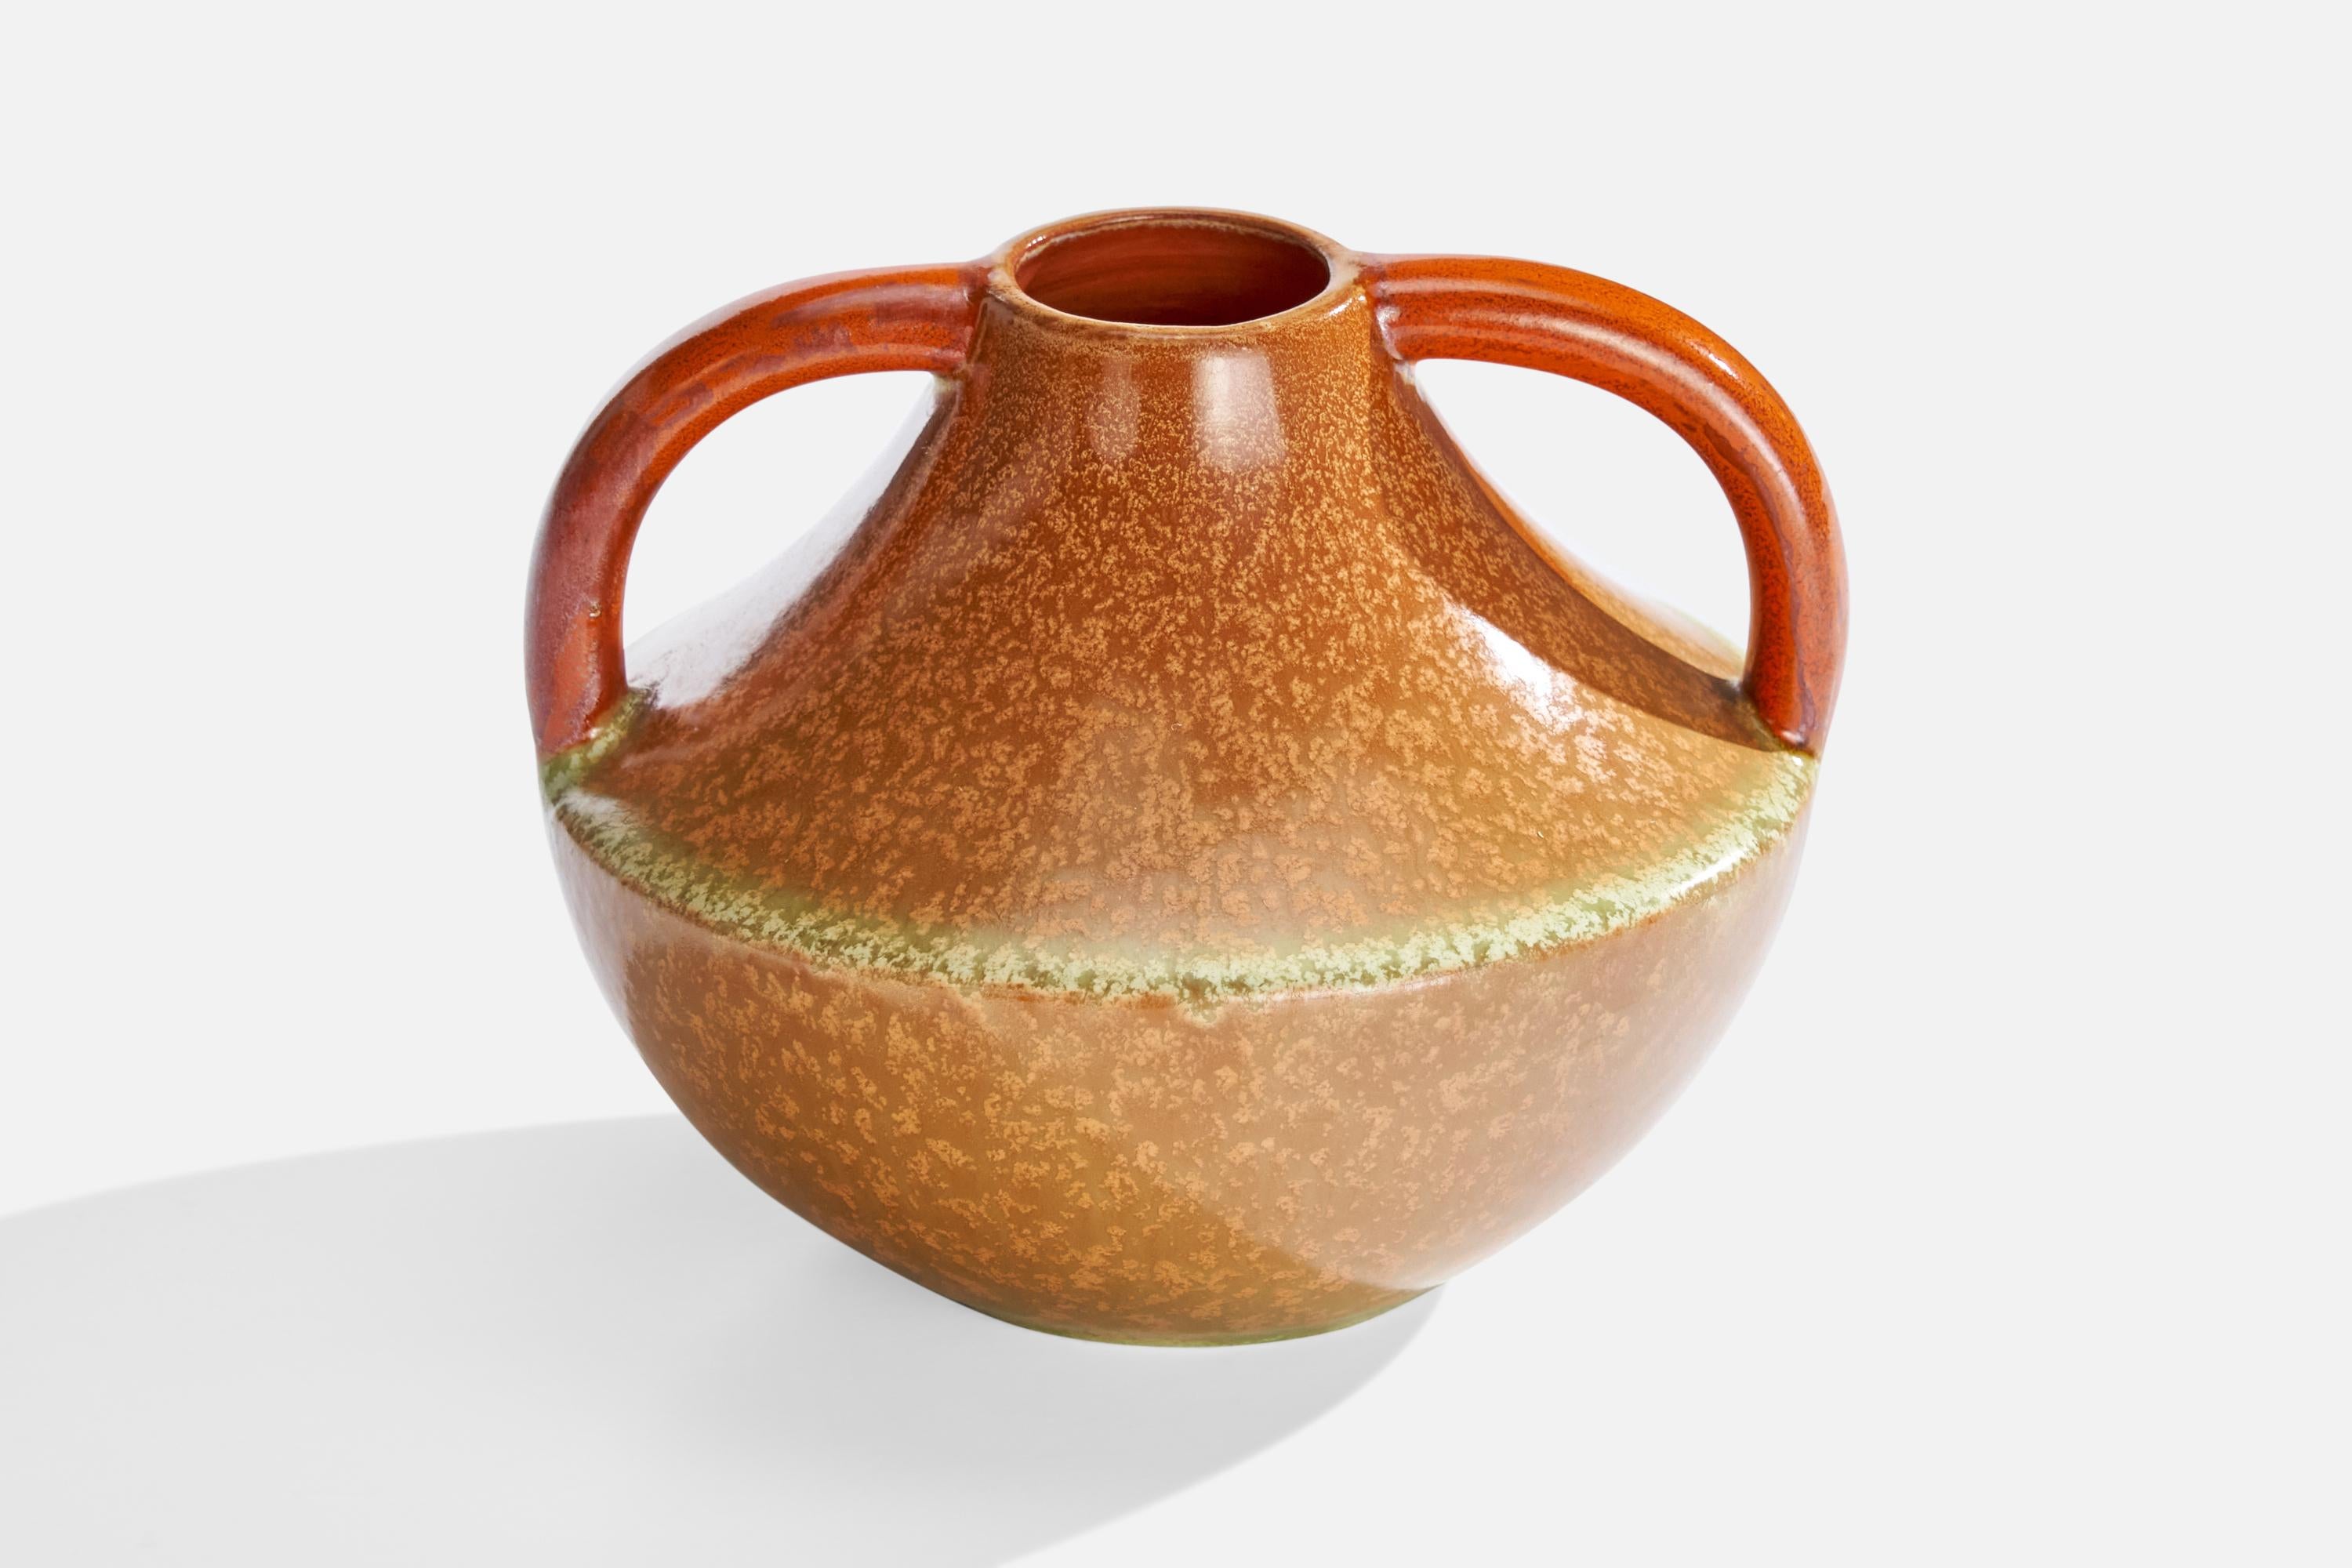 An orange, beige and brown-glazed stoneware vase designed and produced by Andersson & Johansson, Sweden, c. 1940s.